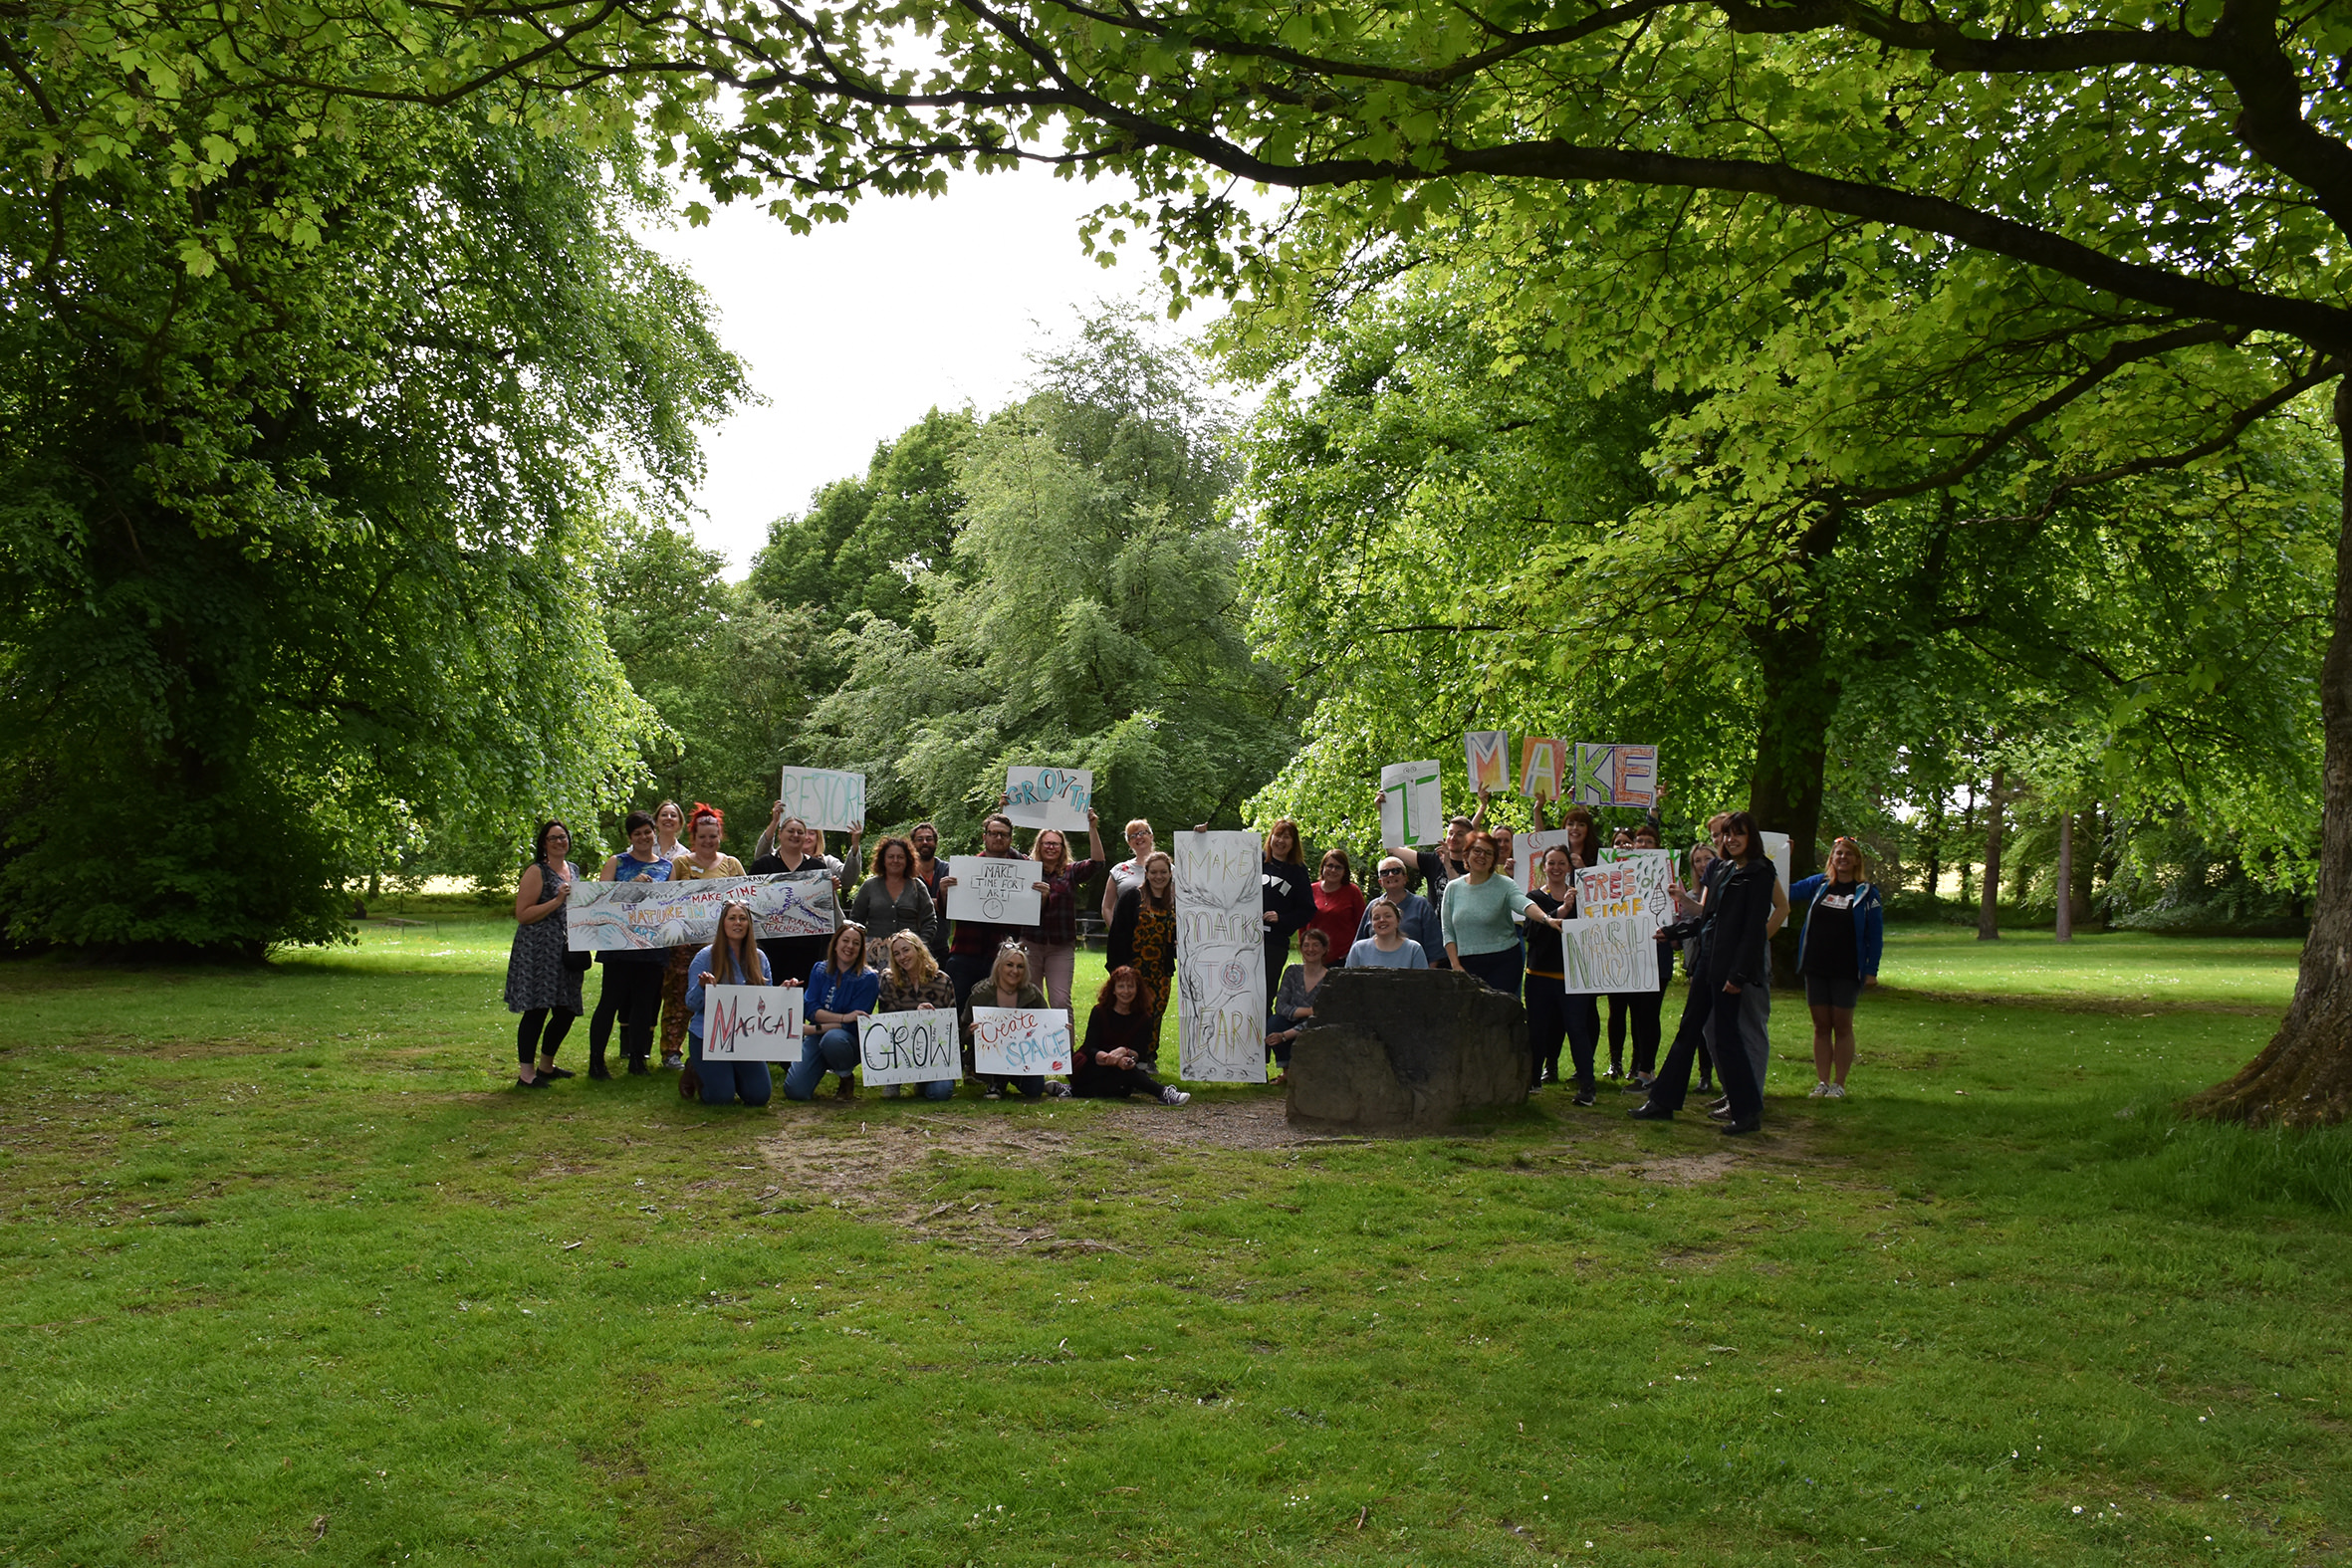 A large group of people holding hand decorated banners under the trees at YSP.